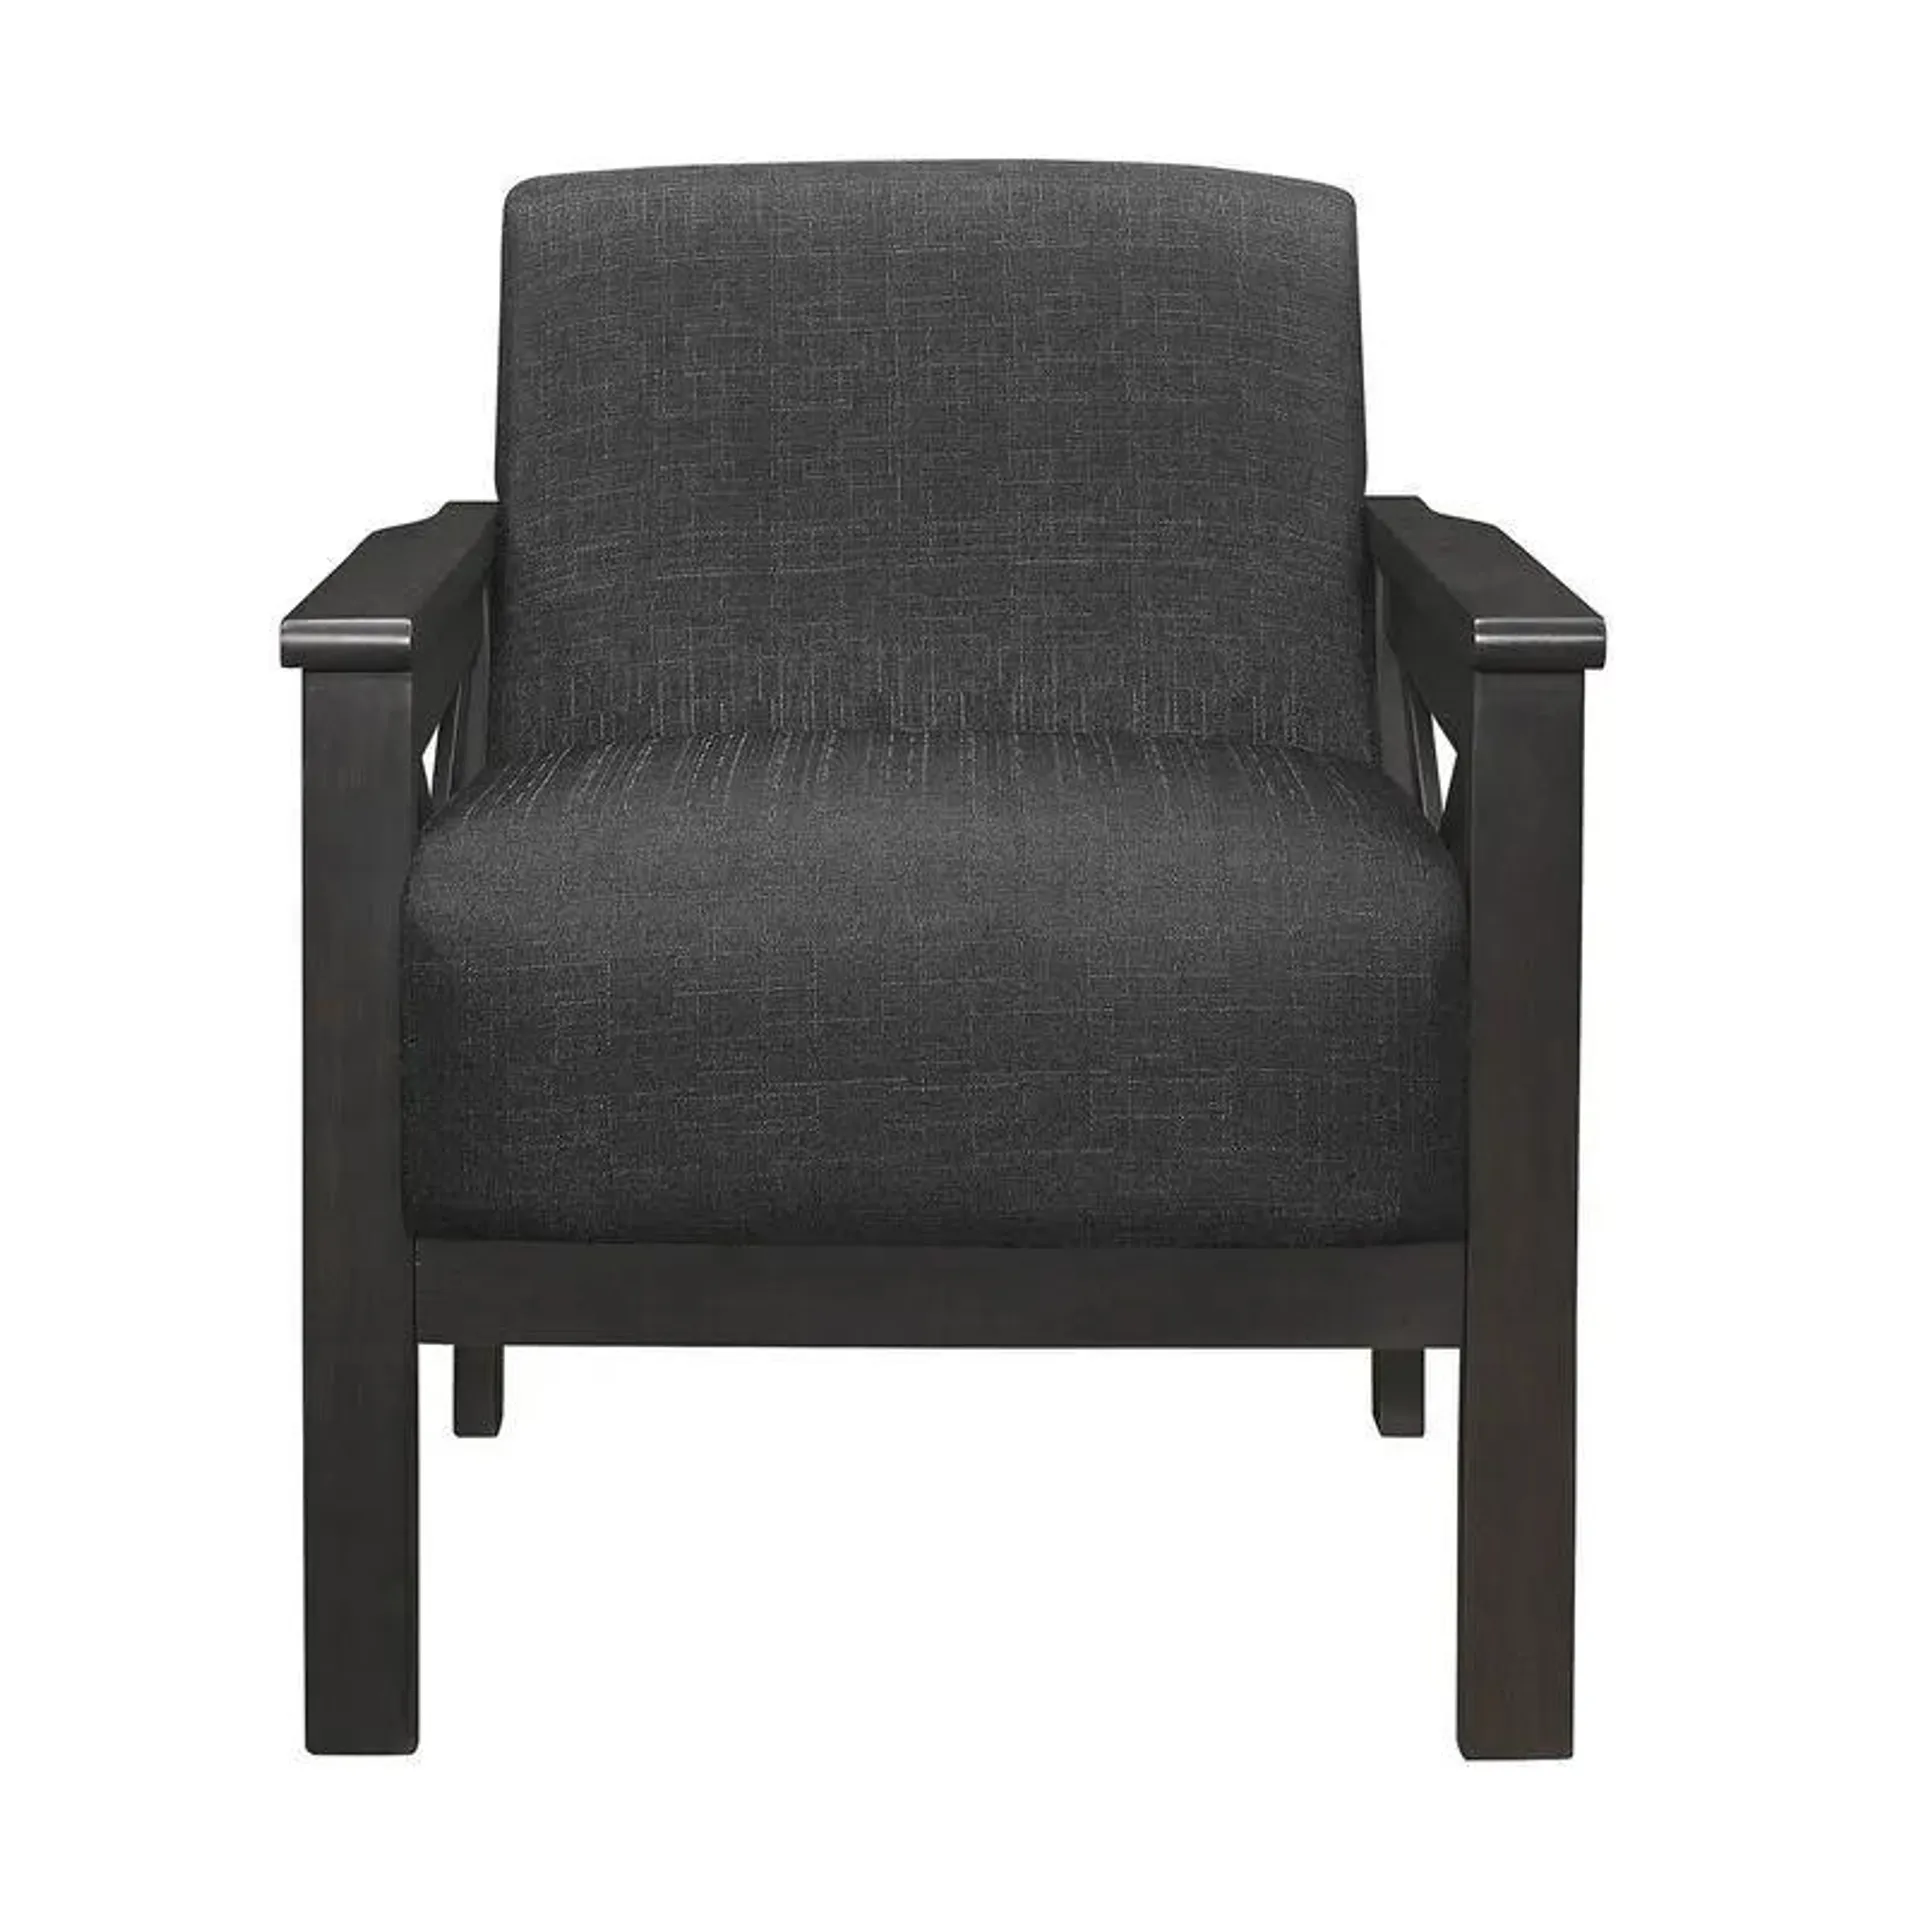 Lexicon Herriman Collection Solid Rubberwood Frame/Textured Fabric Accent Chair